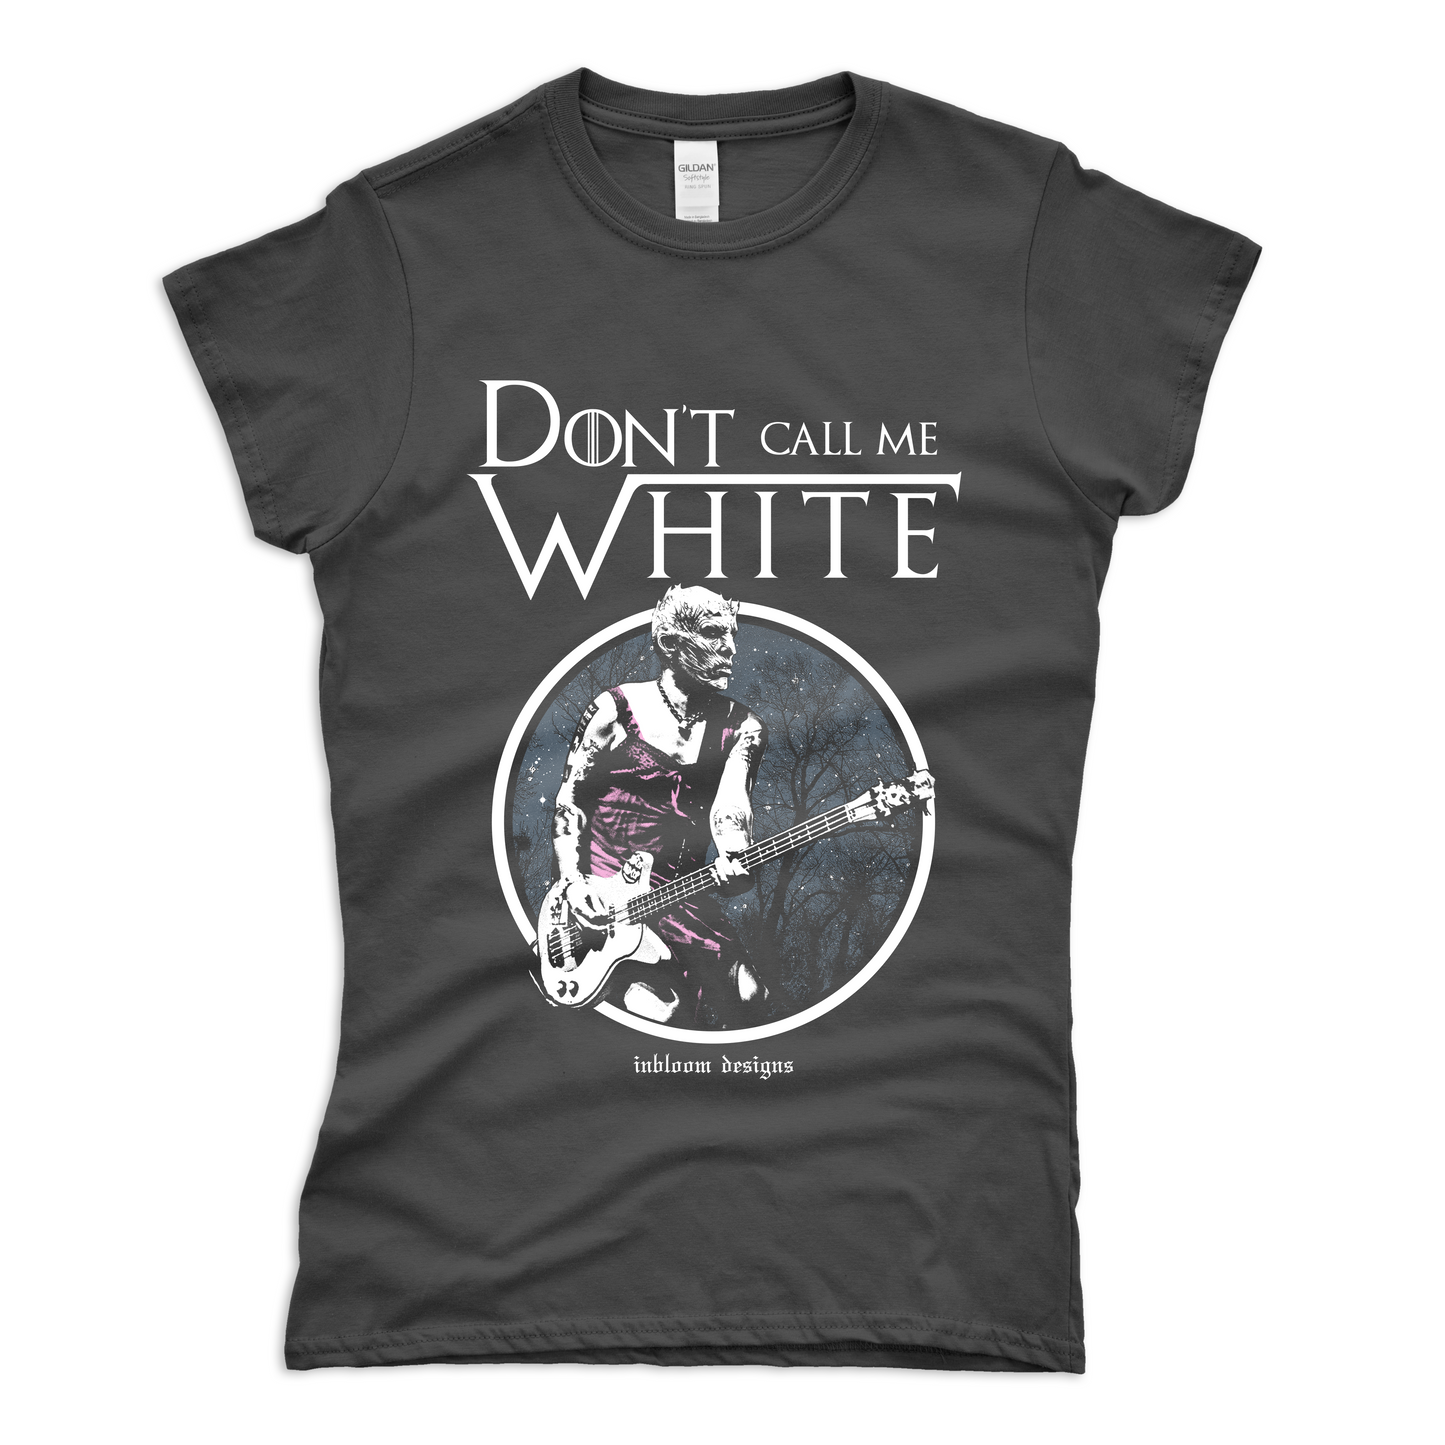 DON'T CALL ME WHITE - Alex Inbloom Chica / Negro / S Camisas y tops